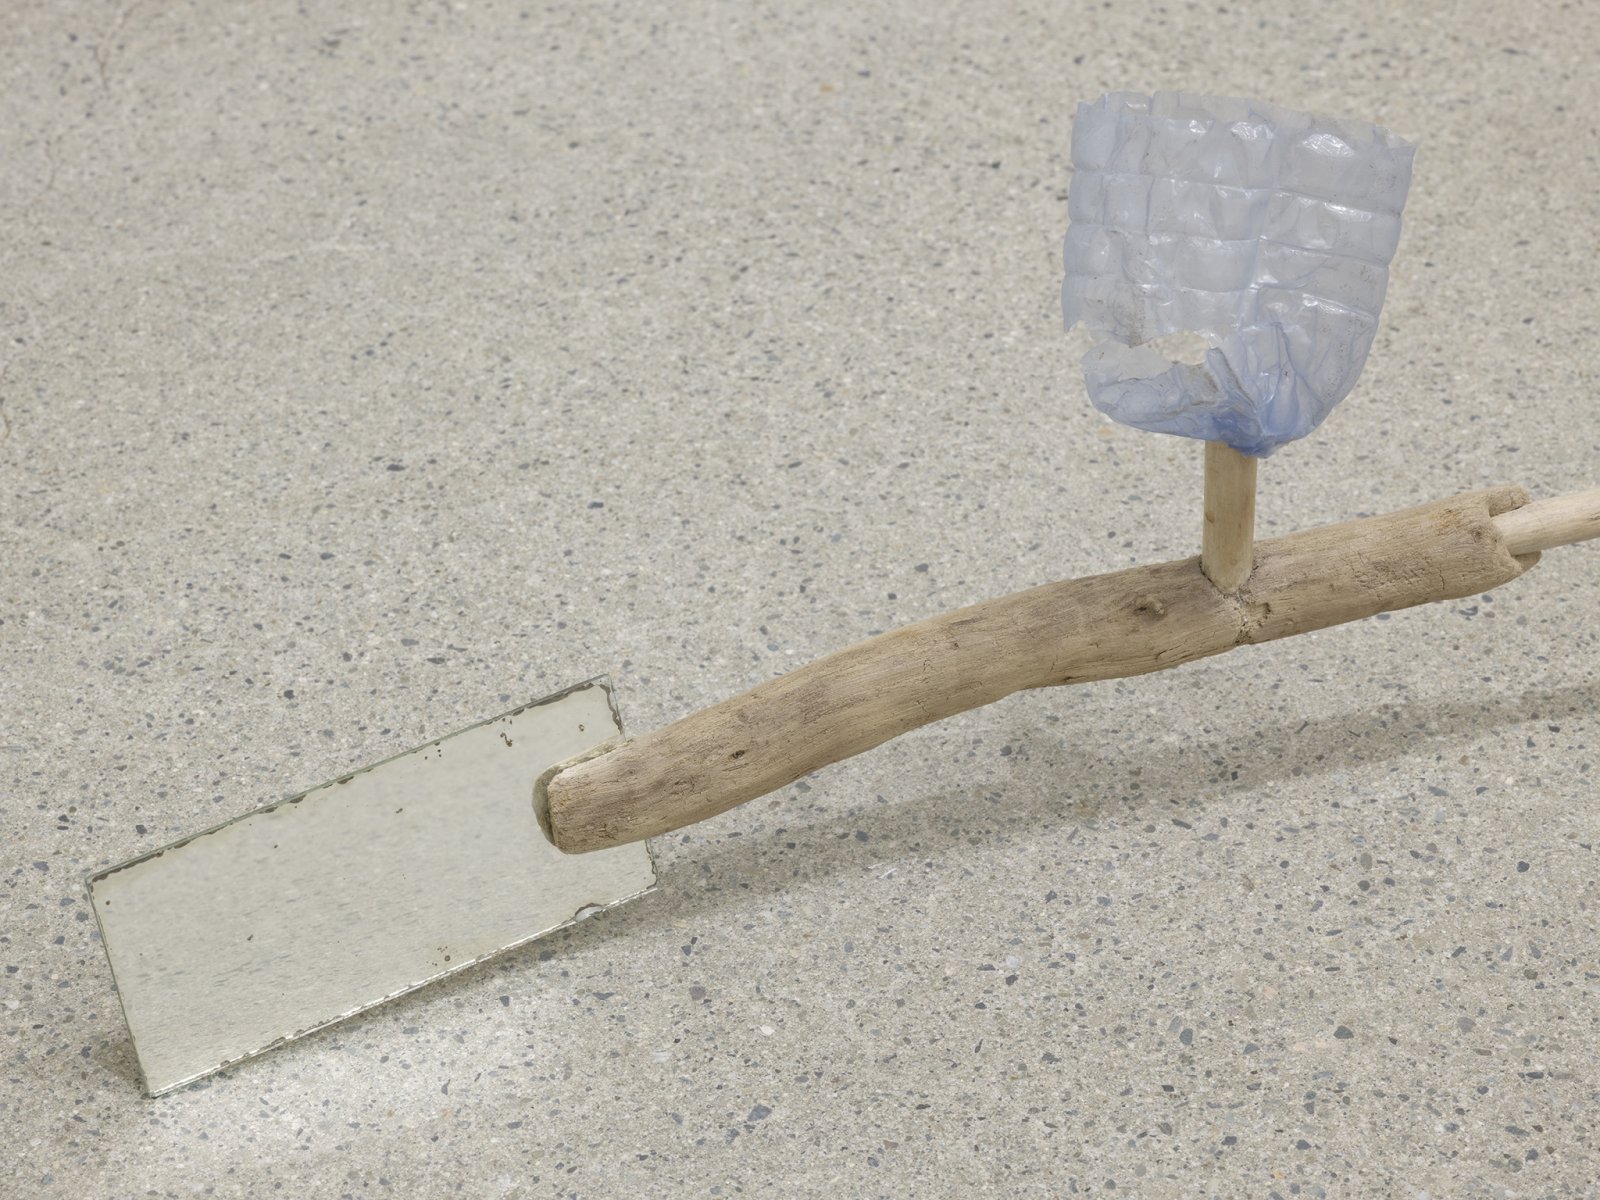 ​Ashes Withyman, Under a mouldy sky (spent tire, slab of stone, torn barbed wire fence) (detail), 2019, branches, margarine container base, penny, portion of water bottle, mirror, 7 x 26 x 4 in. (18 x 66 x 10 cm) by Ashes Withyman